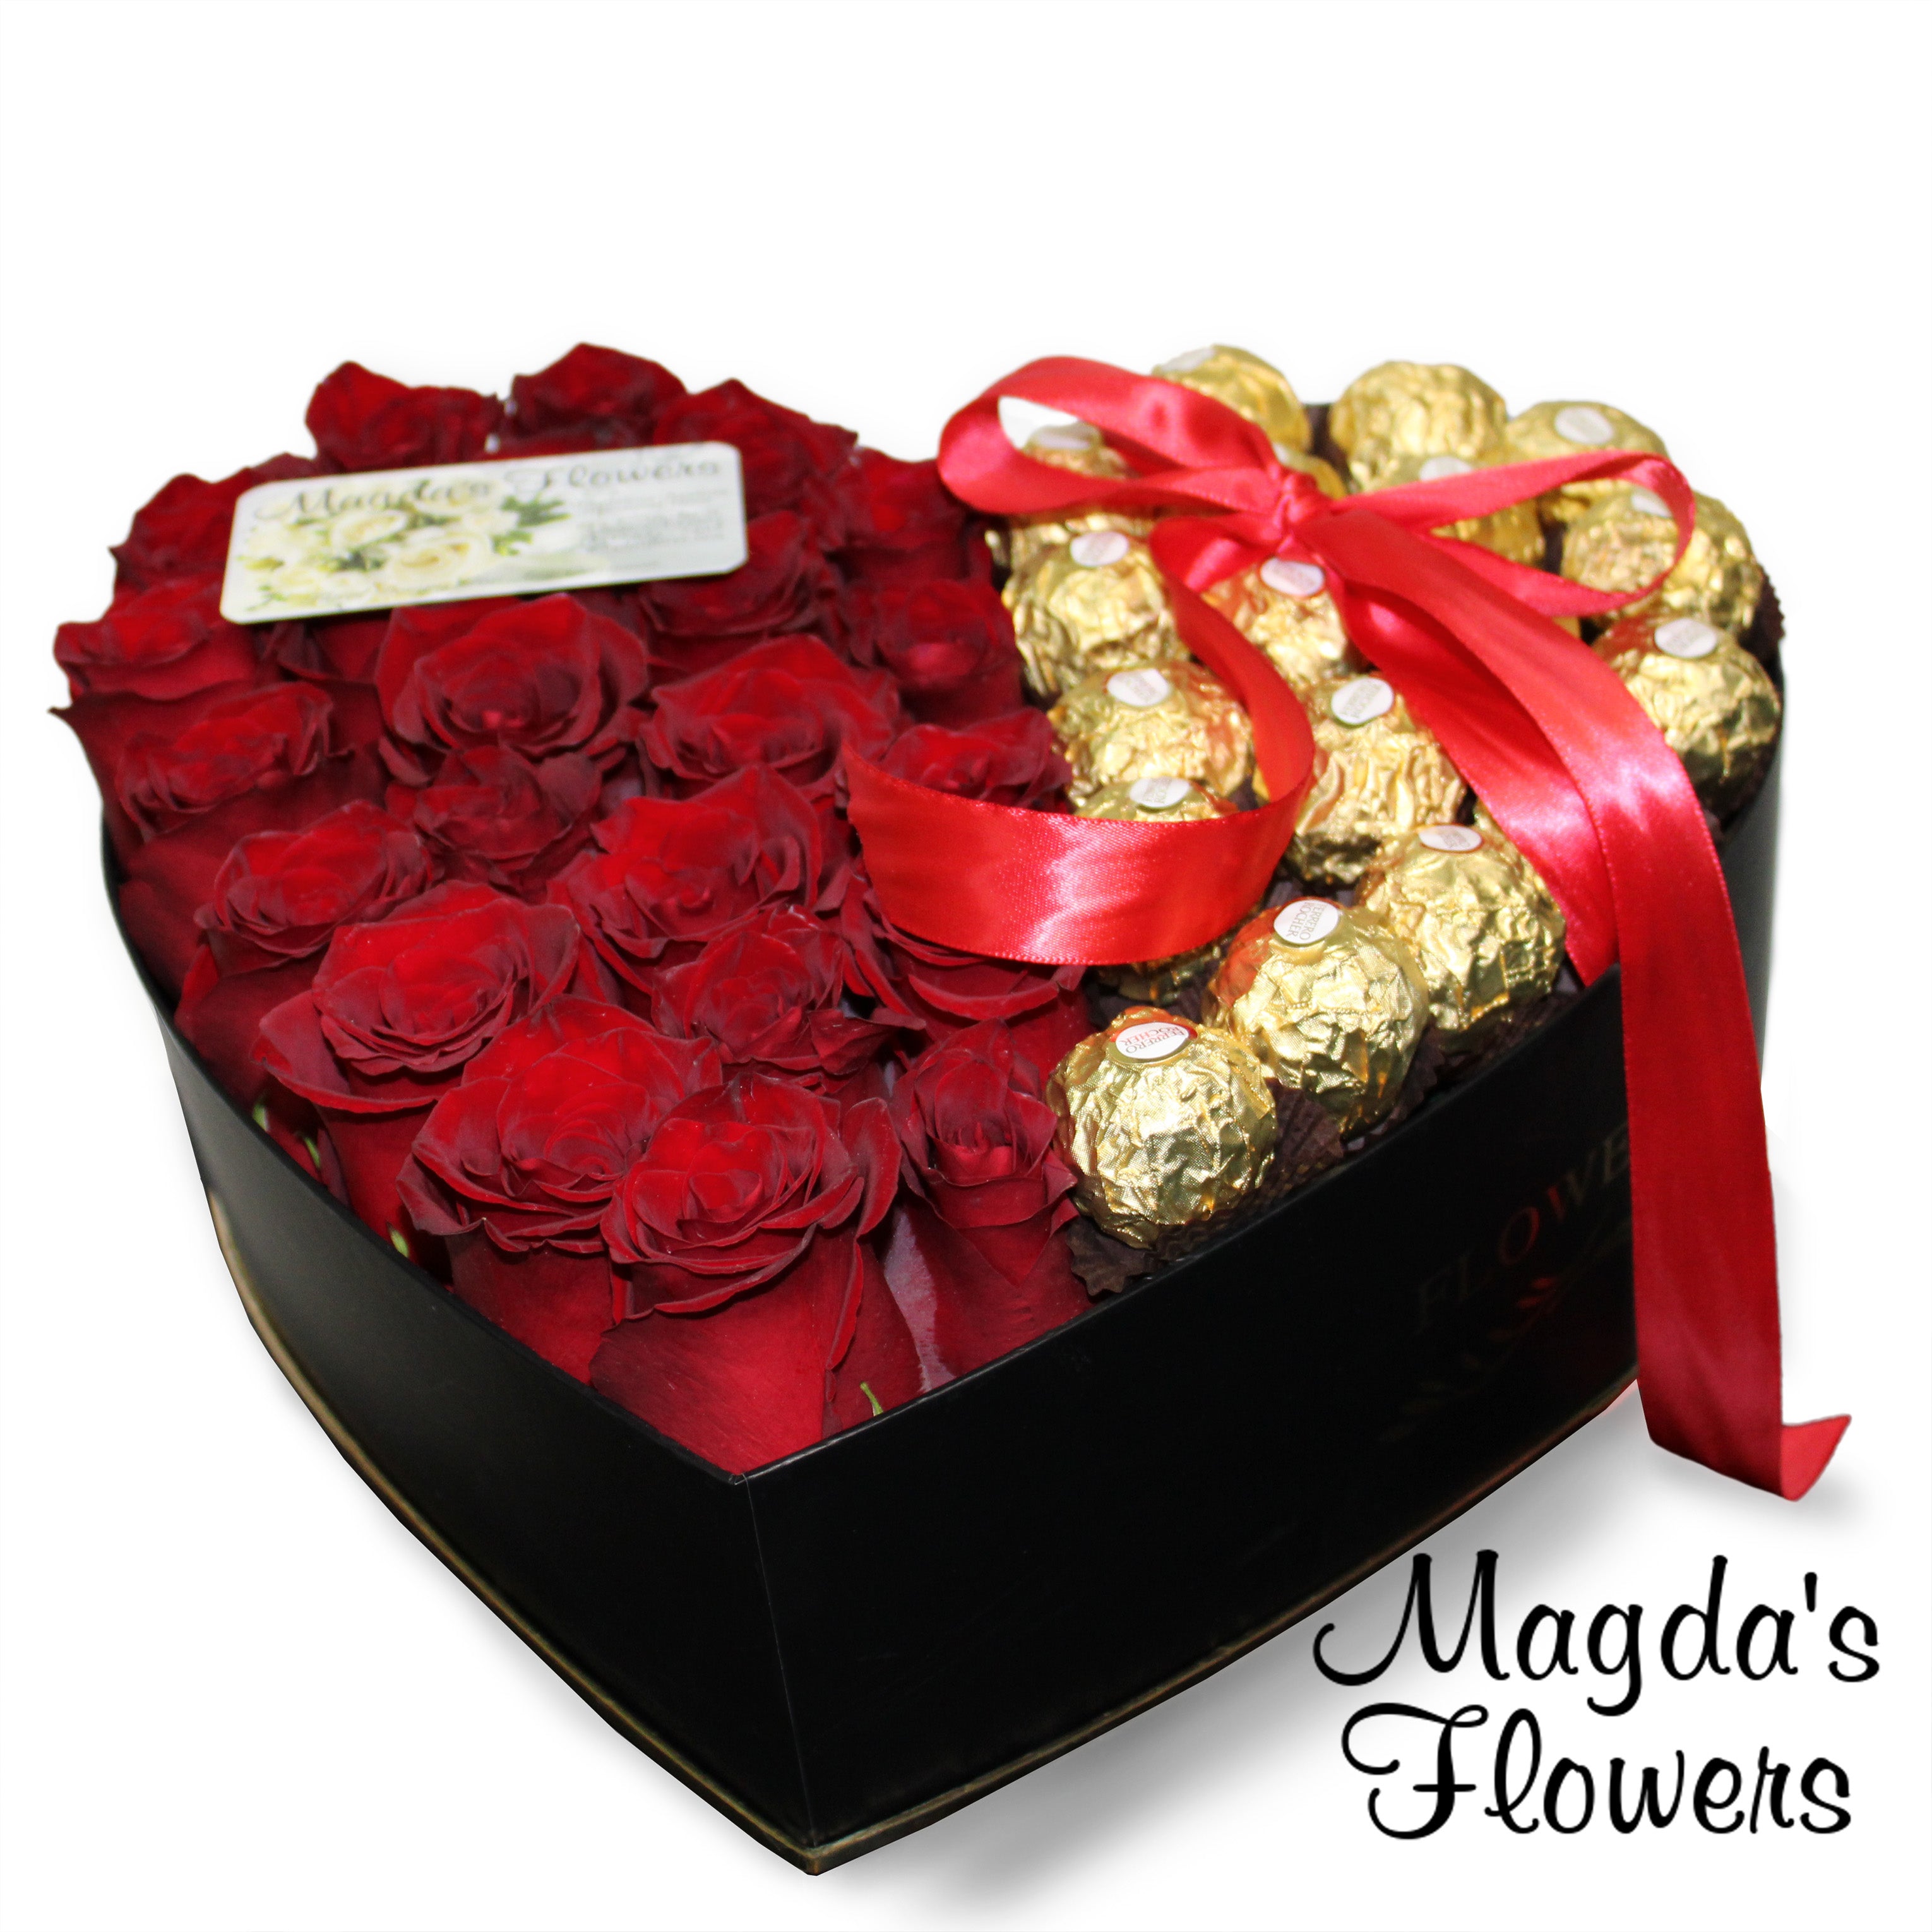 Chocolate Box Black and Gold - Beloved Florist's Flower on